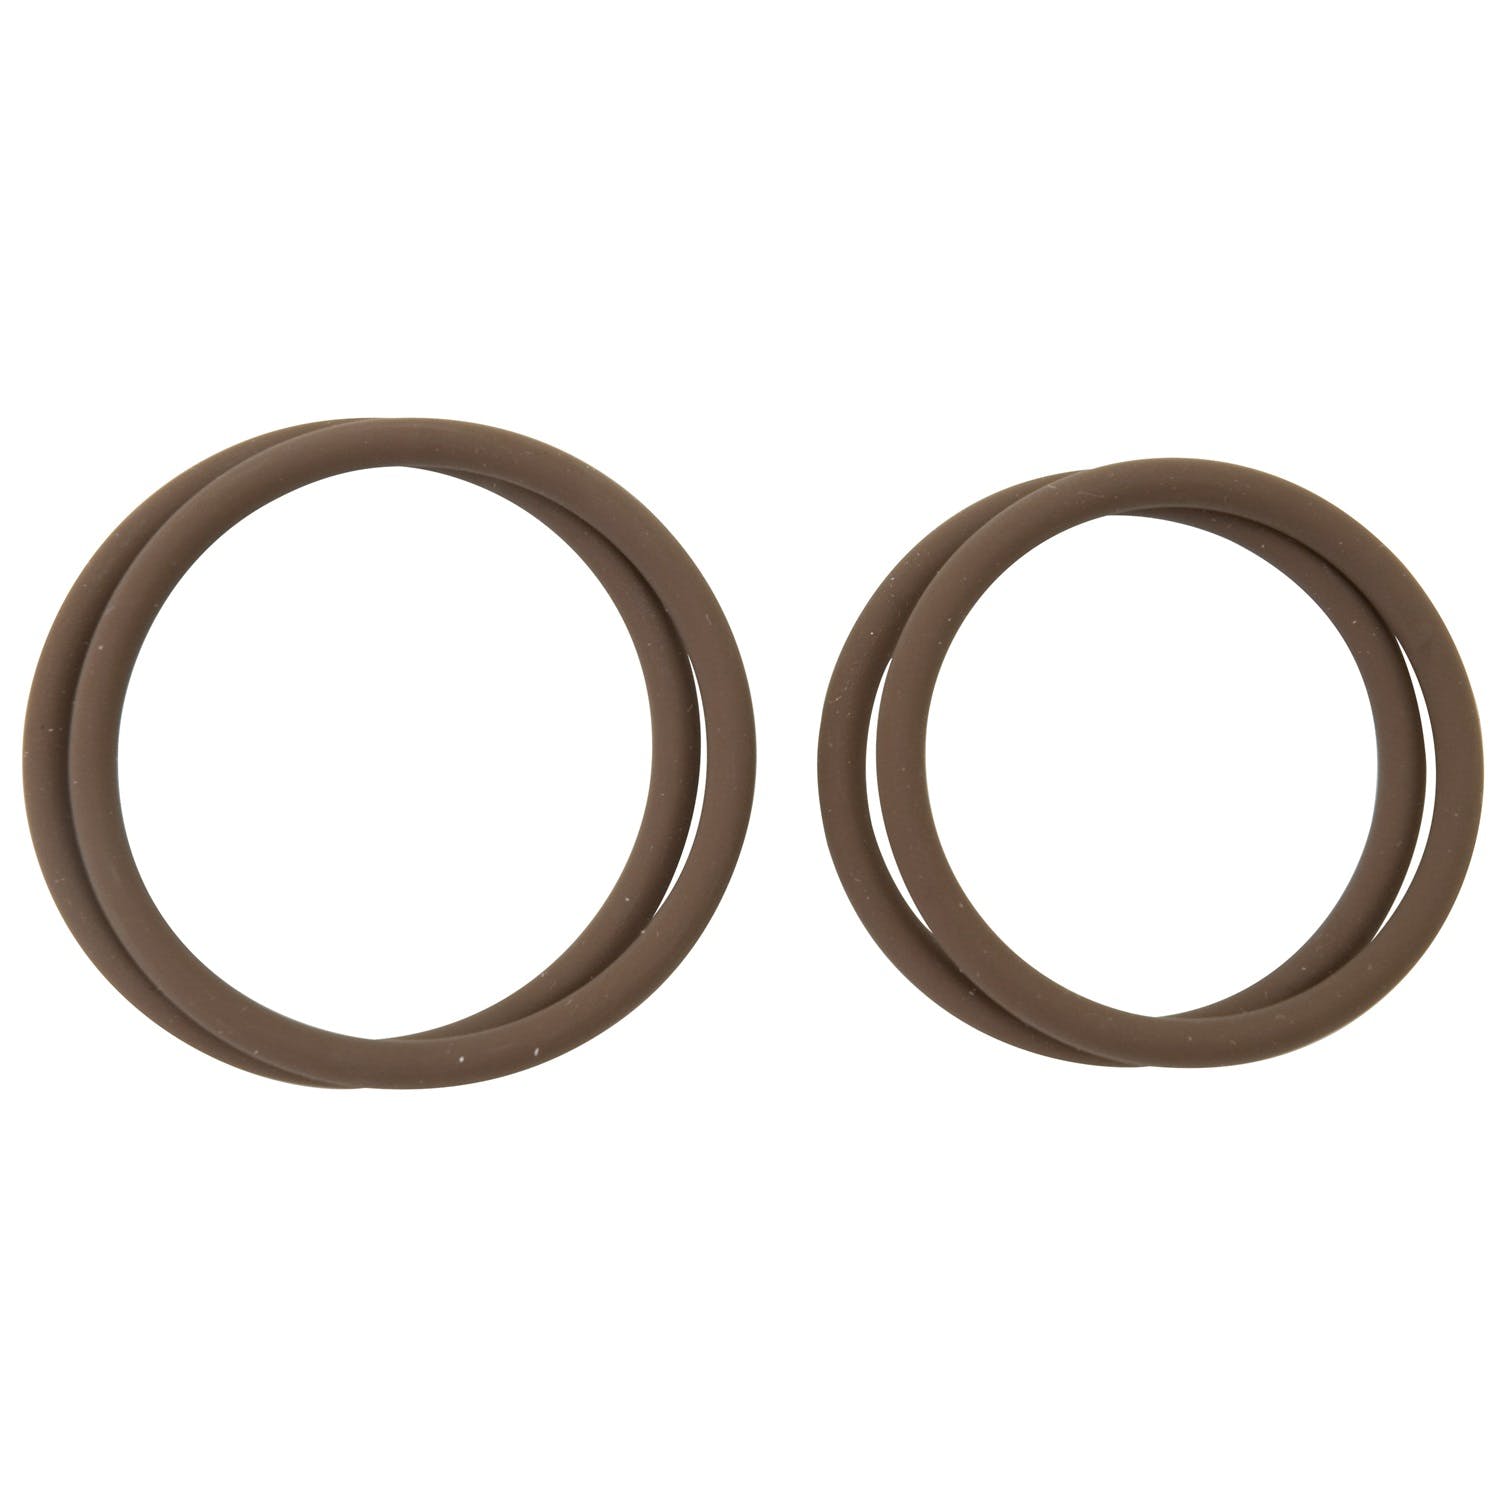 Russell 648990 Replacement Seals For All Profilters